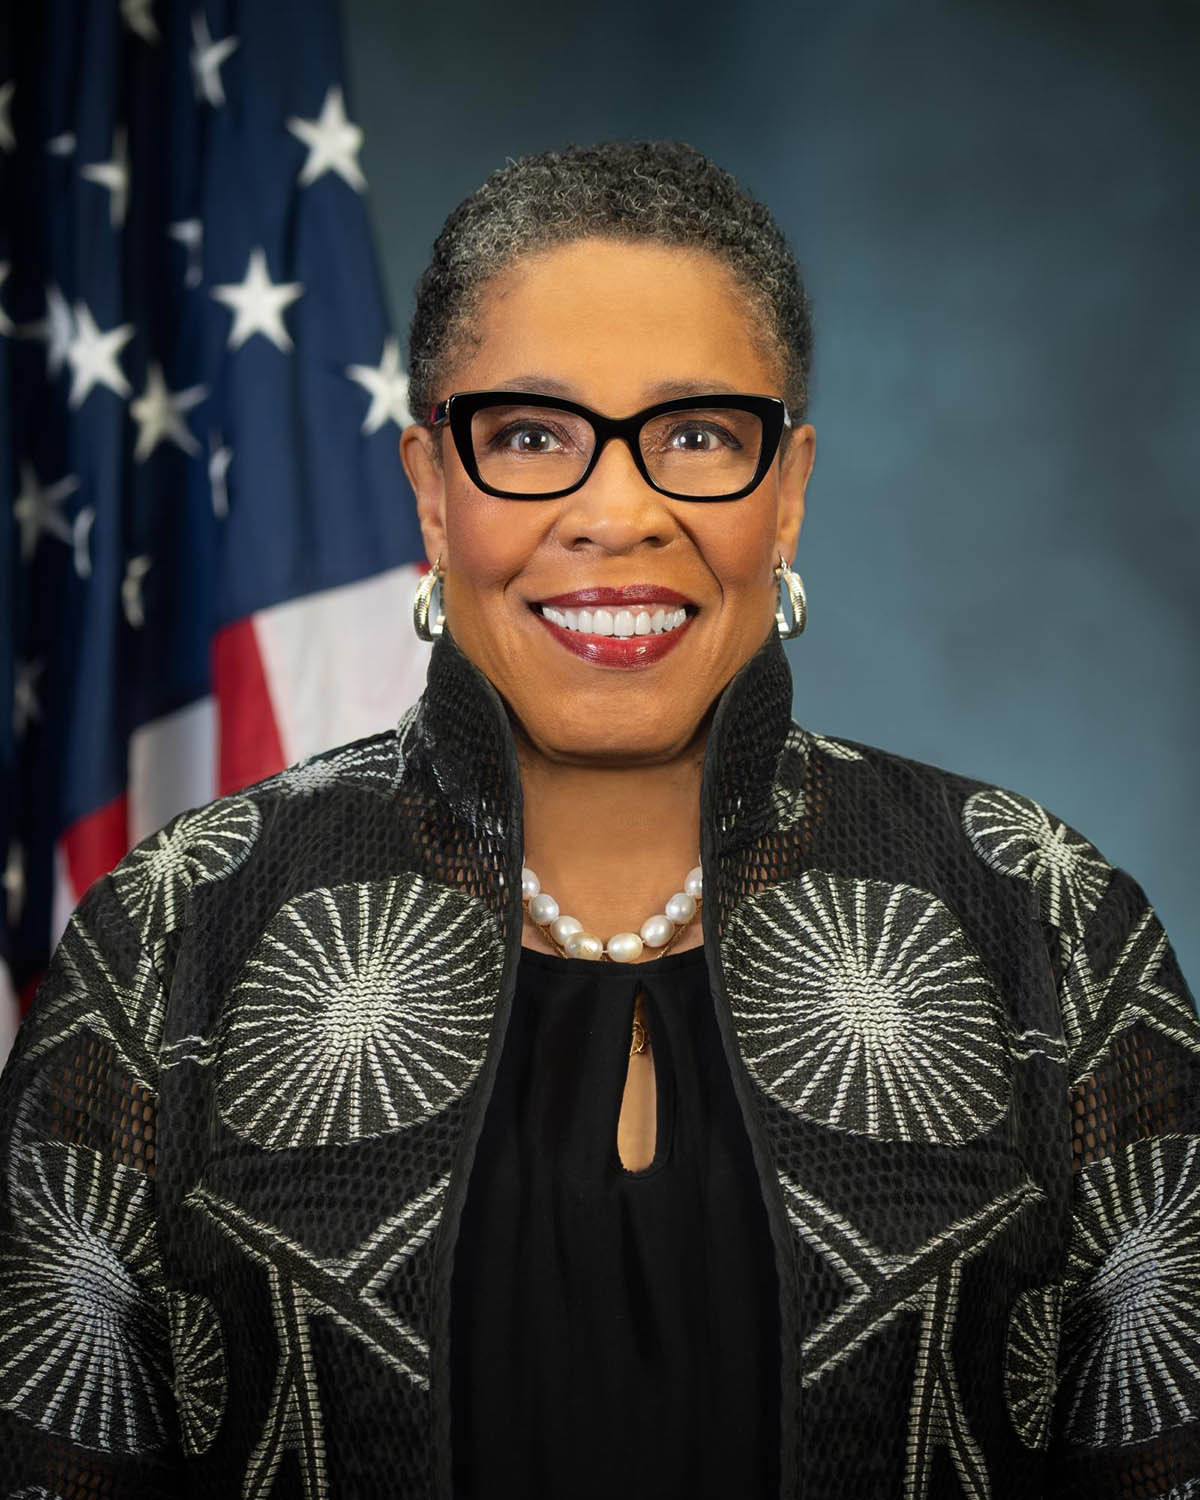 Marcia L. Fudge stands in front of an American flag and a blue background, wearing black glasses.